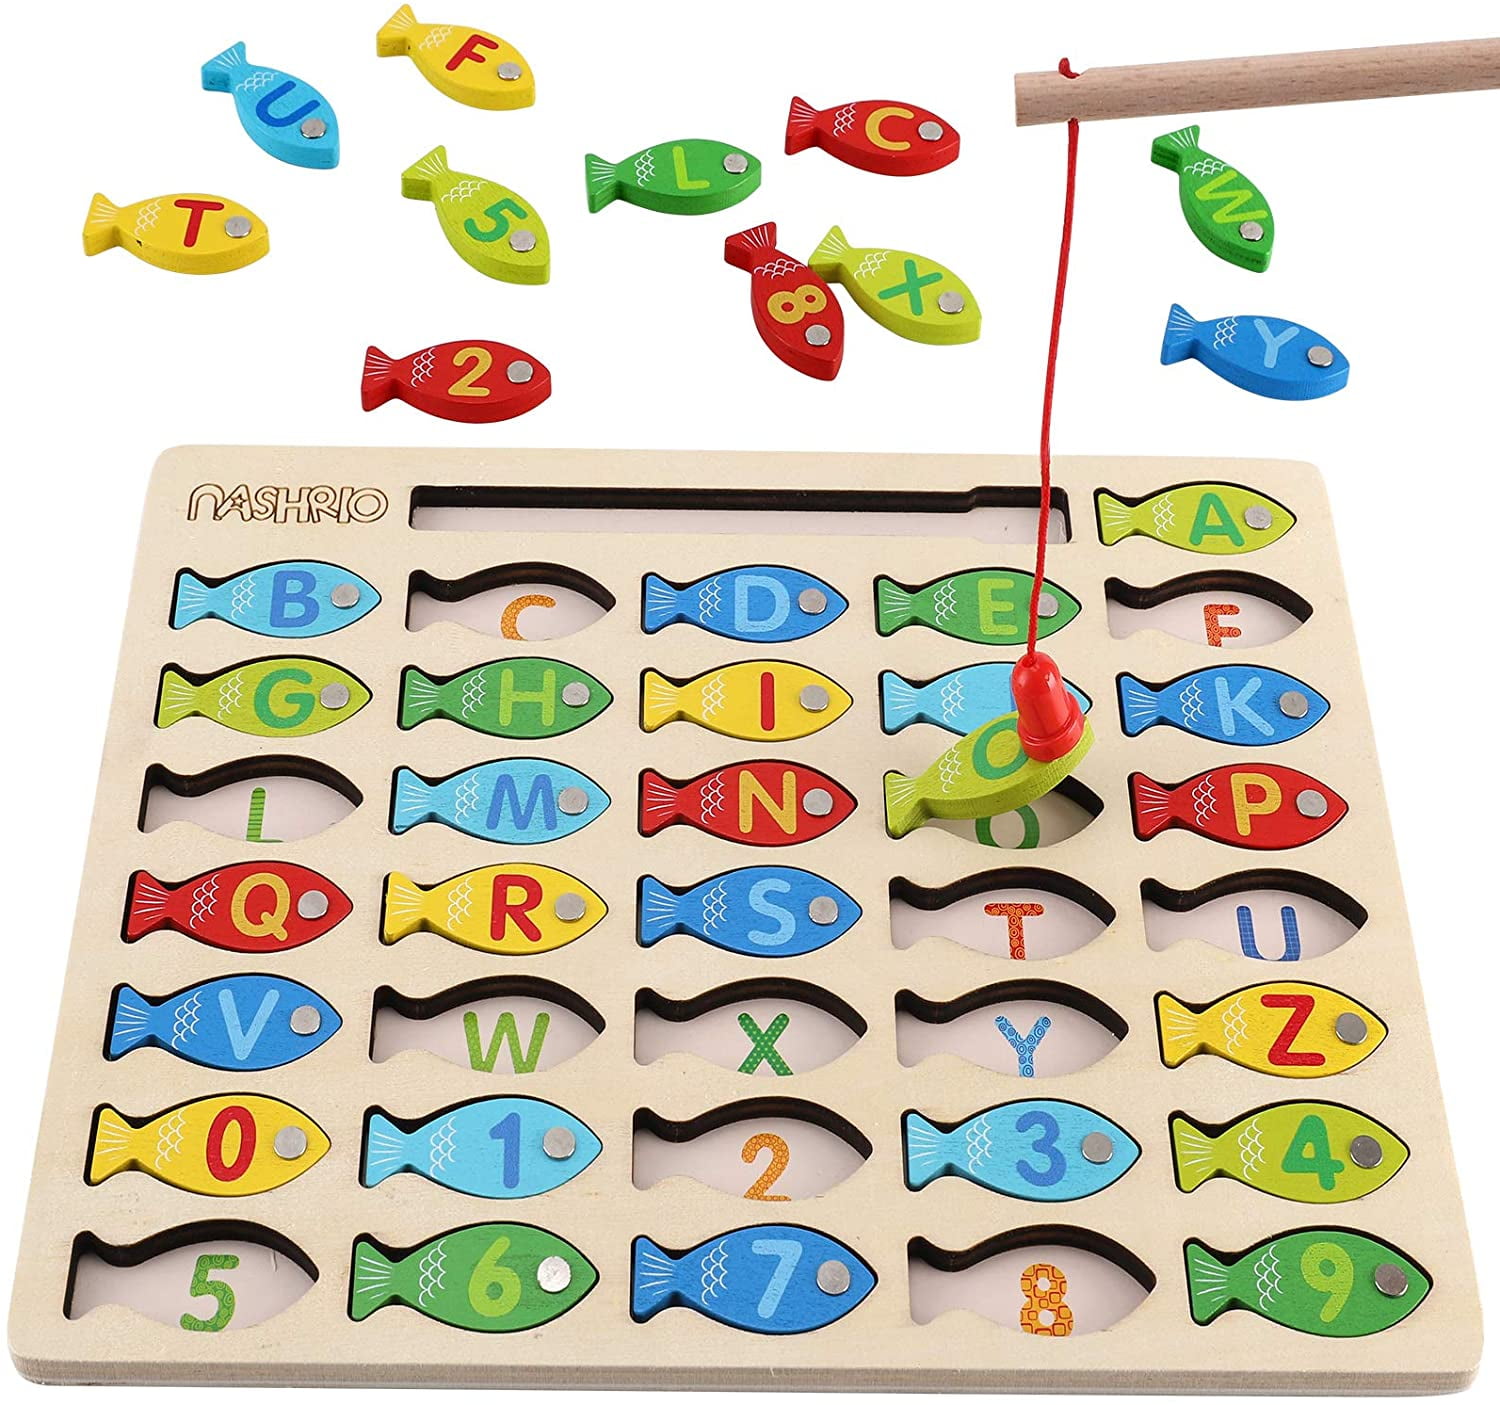 Mini Leaves 13 Piece Wooden Magnetic Fishing Game, Number Of